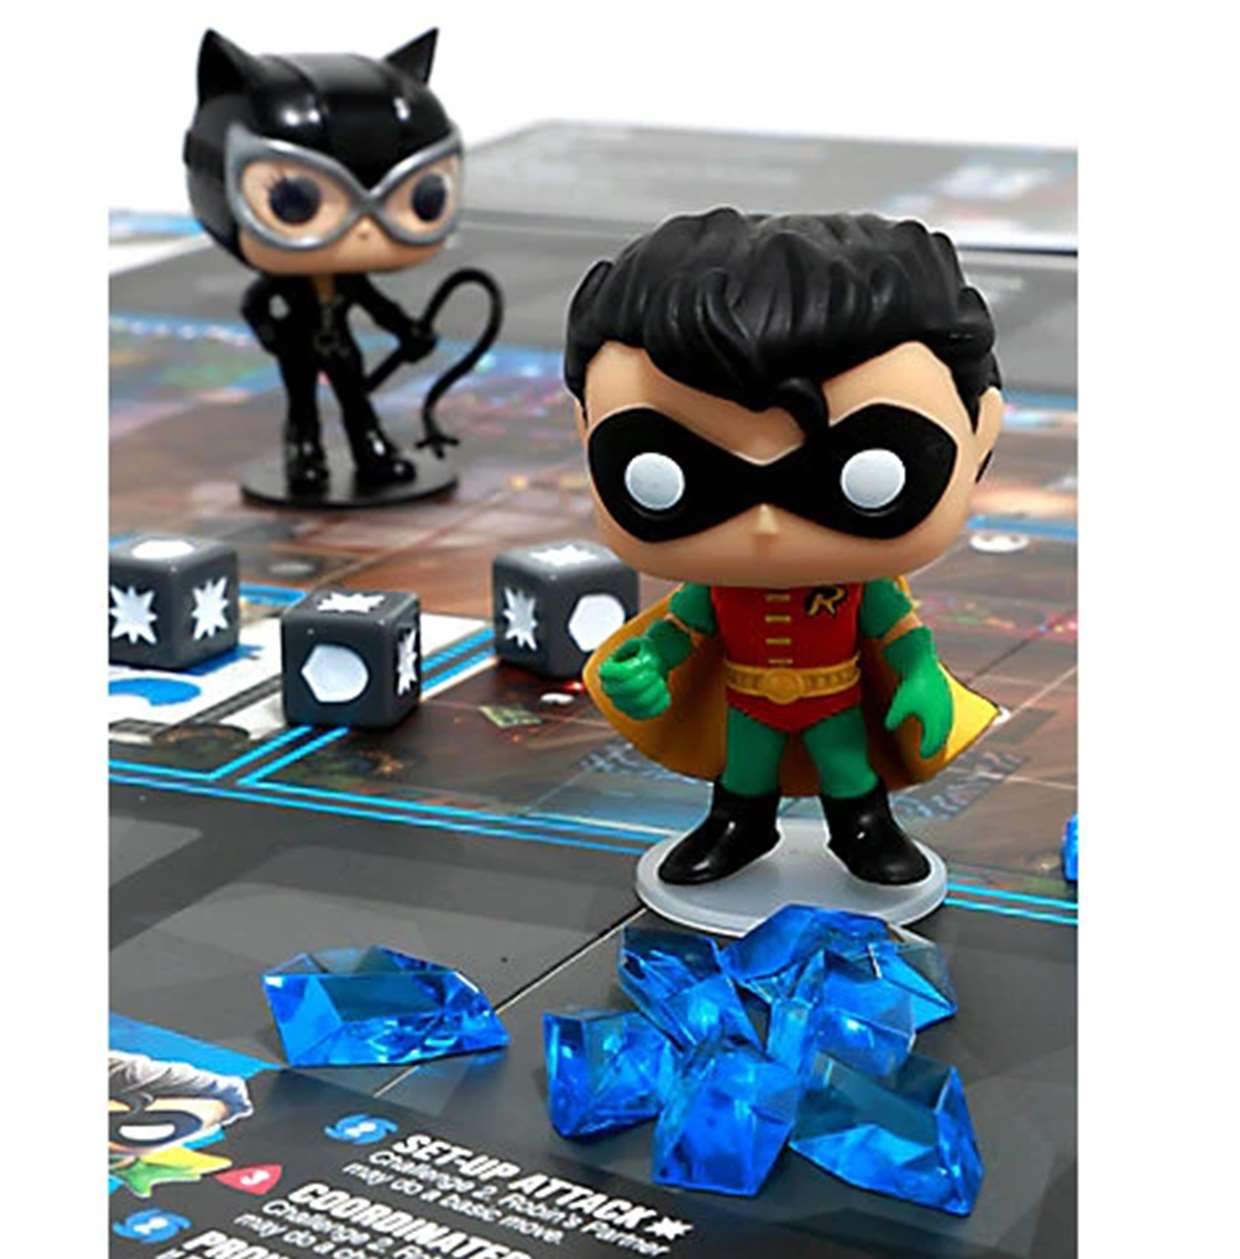 Catwoman + Robin #101 Pack Dc Pop! Funkoverse Strategy Game